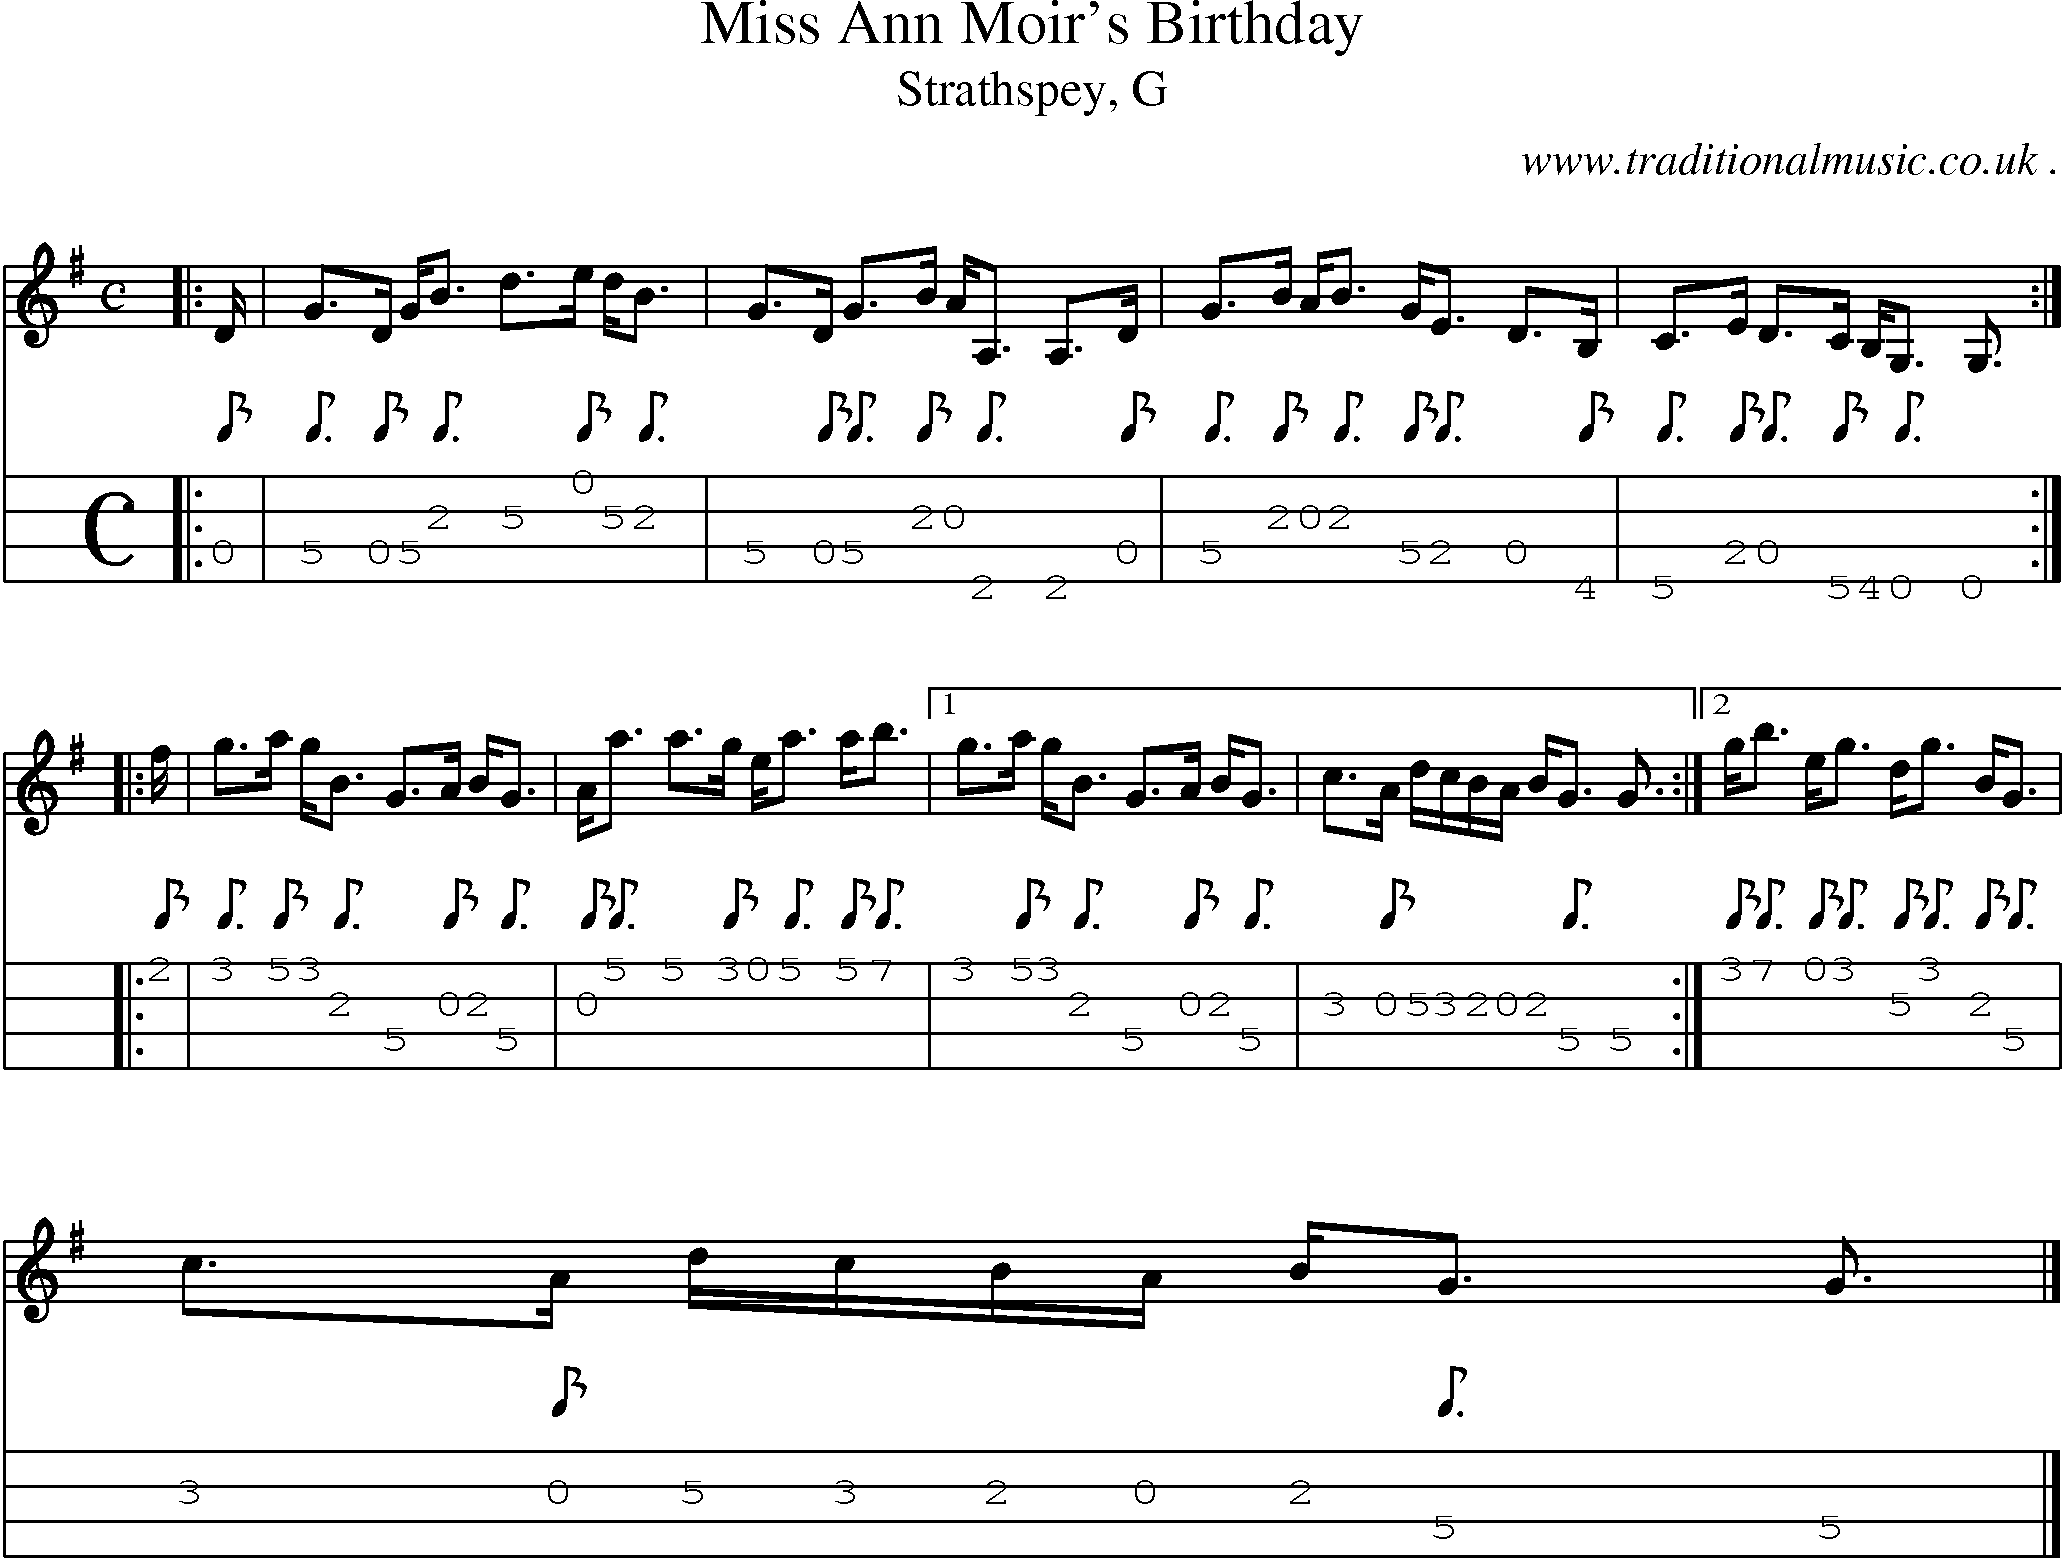 Sheet-music  score, Chords and Mandolin Tabs for Miss Ann Moirs Birthday